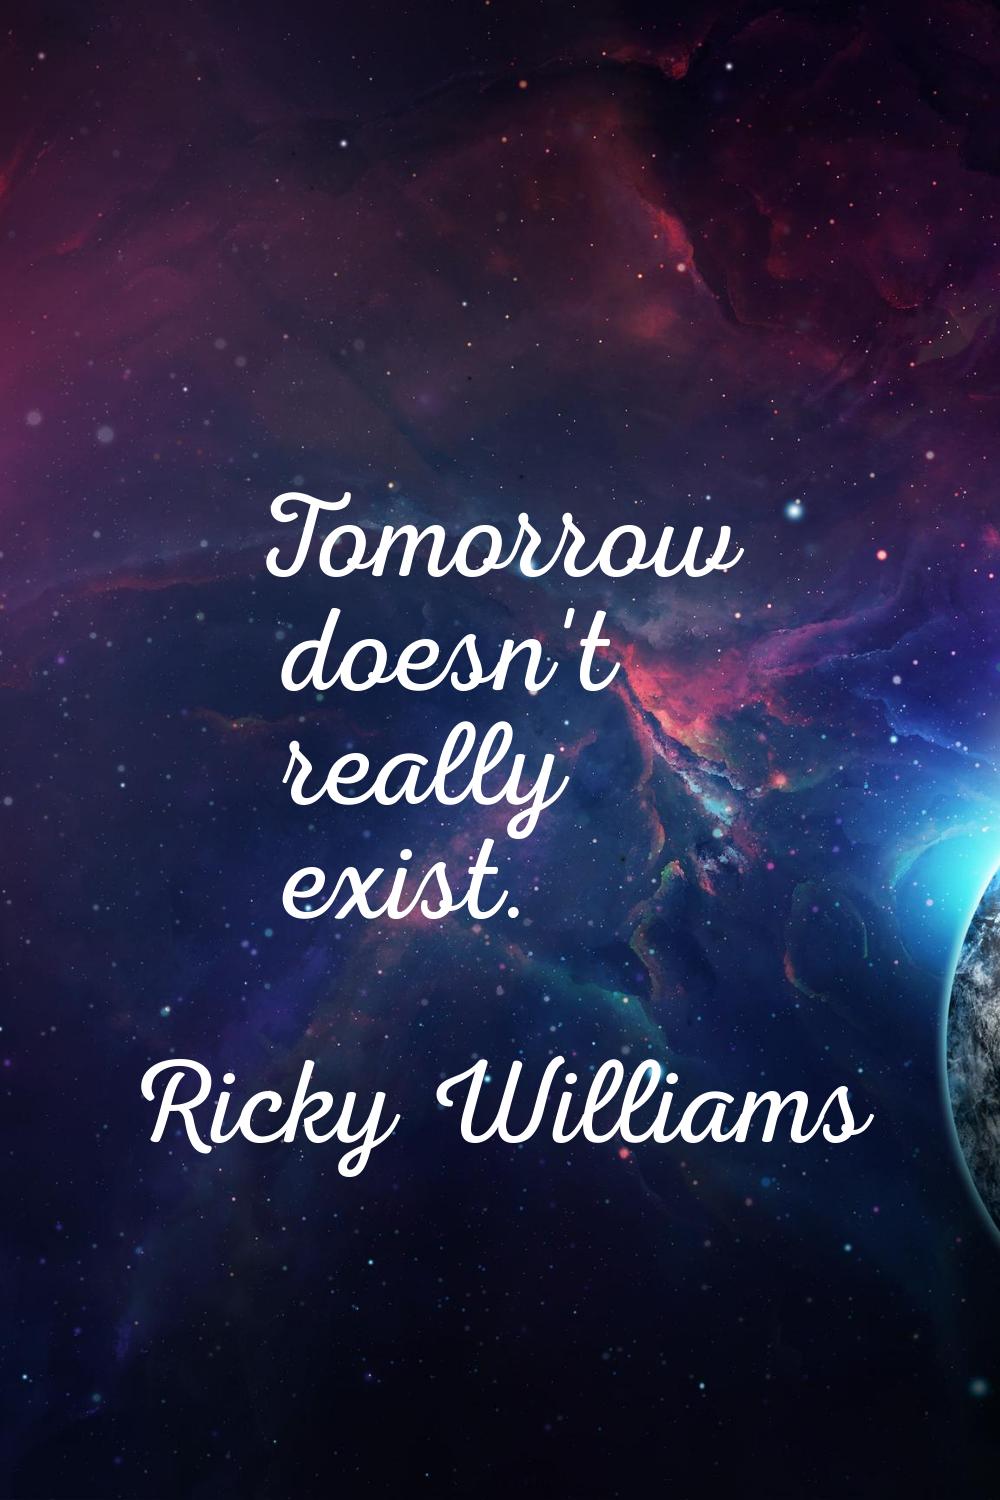 Tomorrow doesn't really exist.